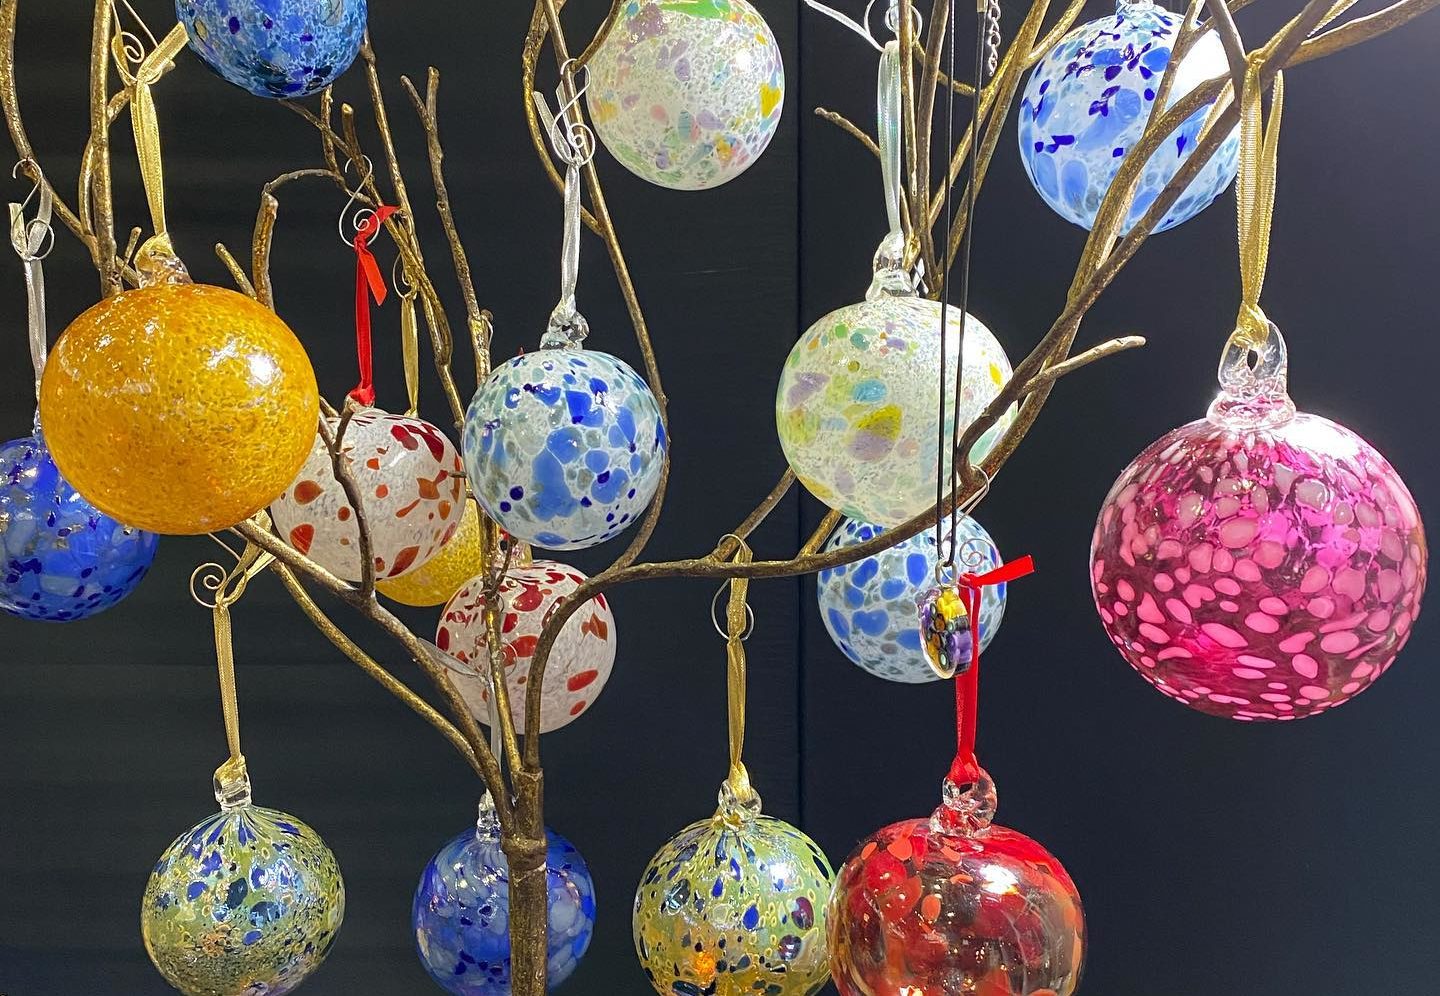 Blown glass ornaments hang on a display tree